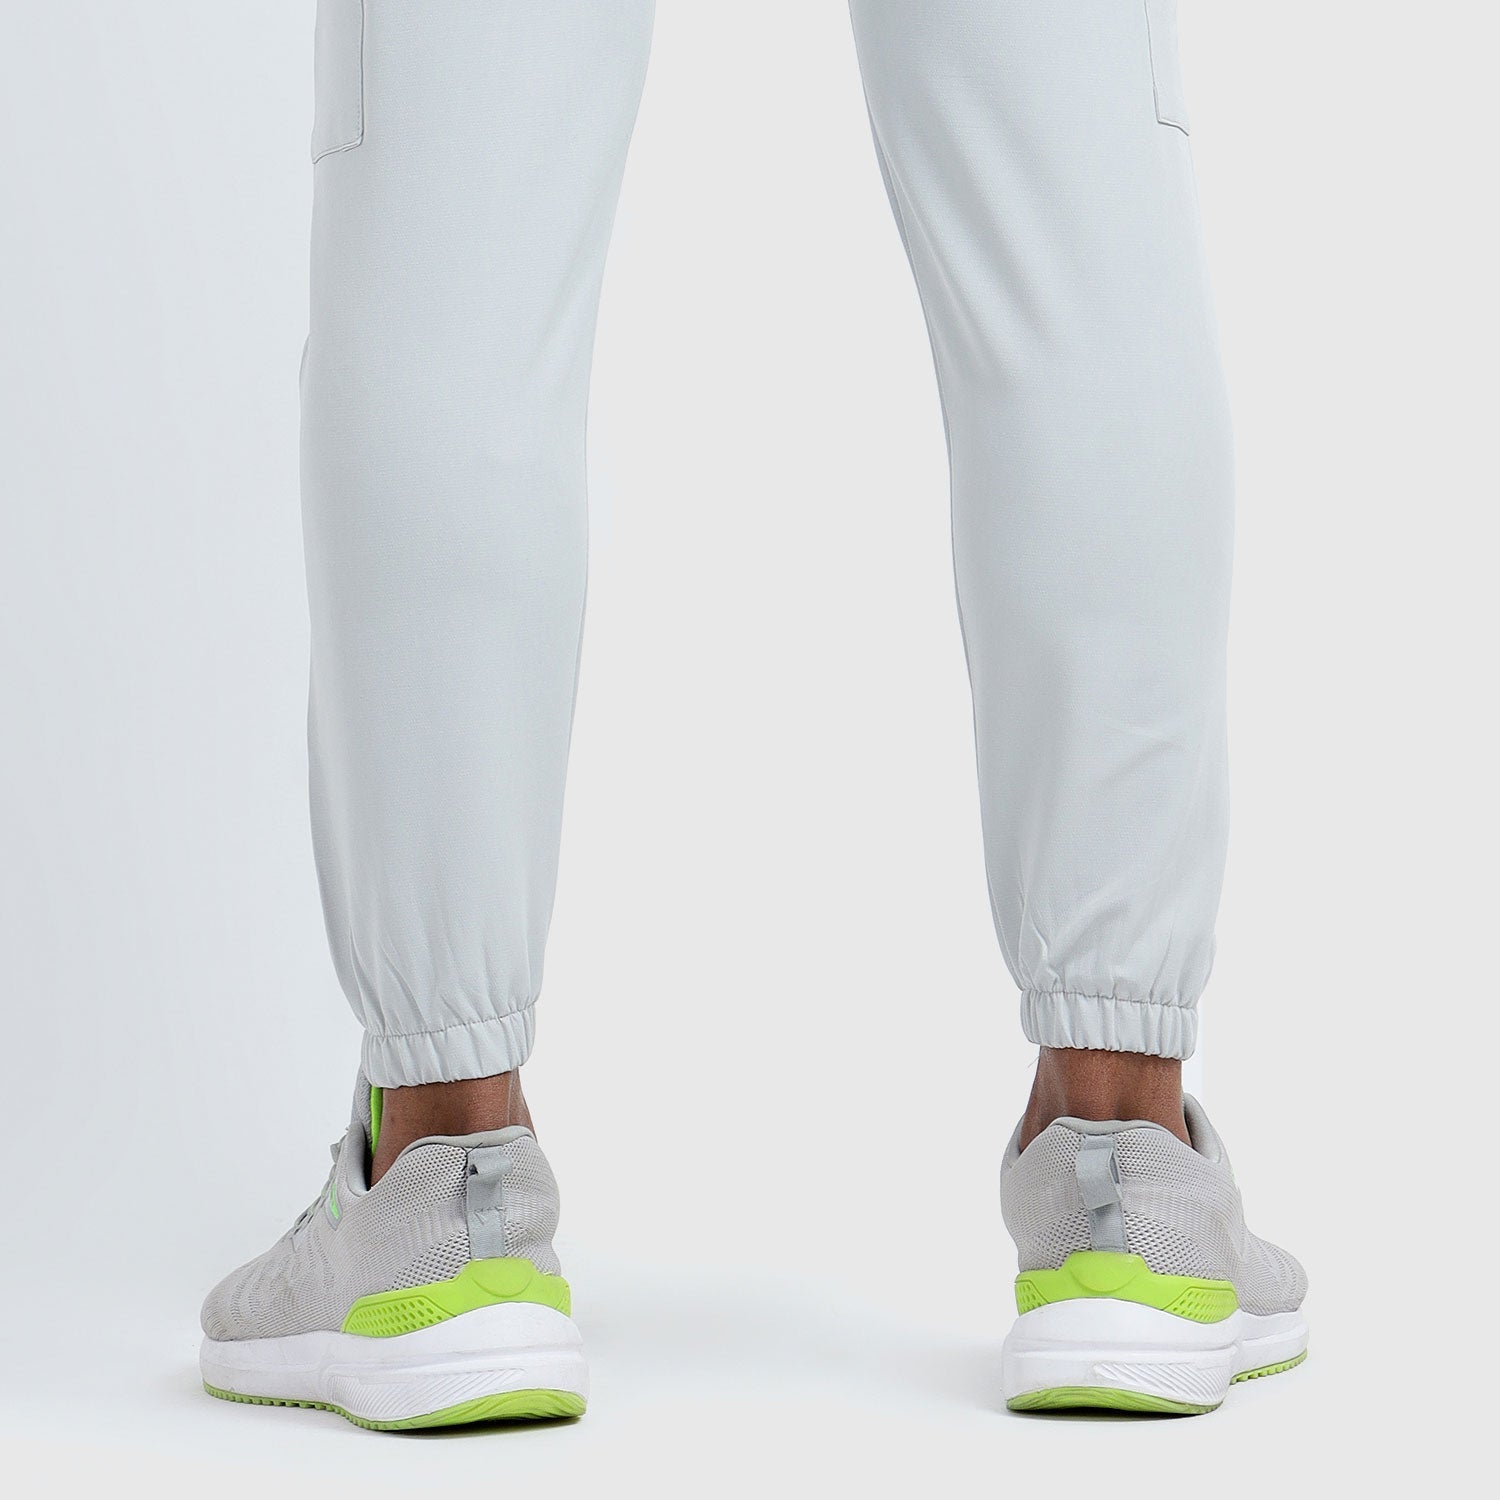 Denmonk: Elevate your look with these Cragopro sharp light grey  Trackpant for mens.